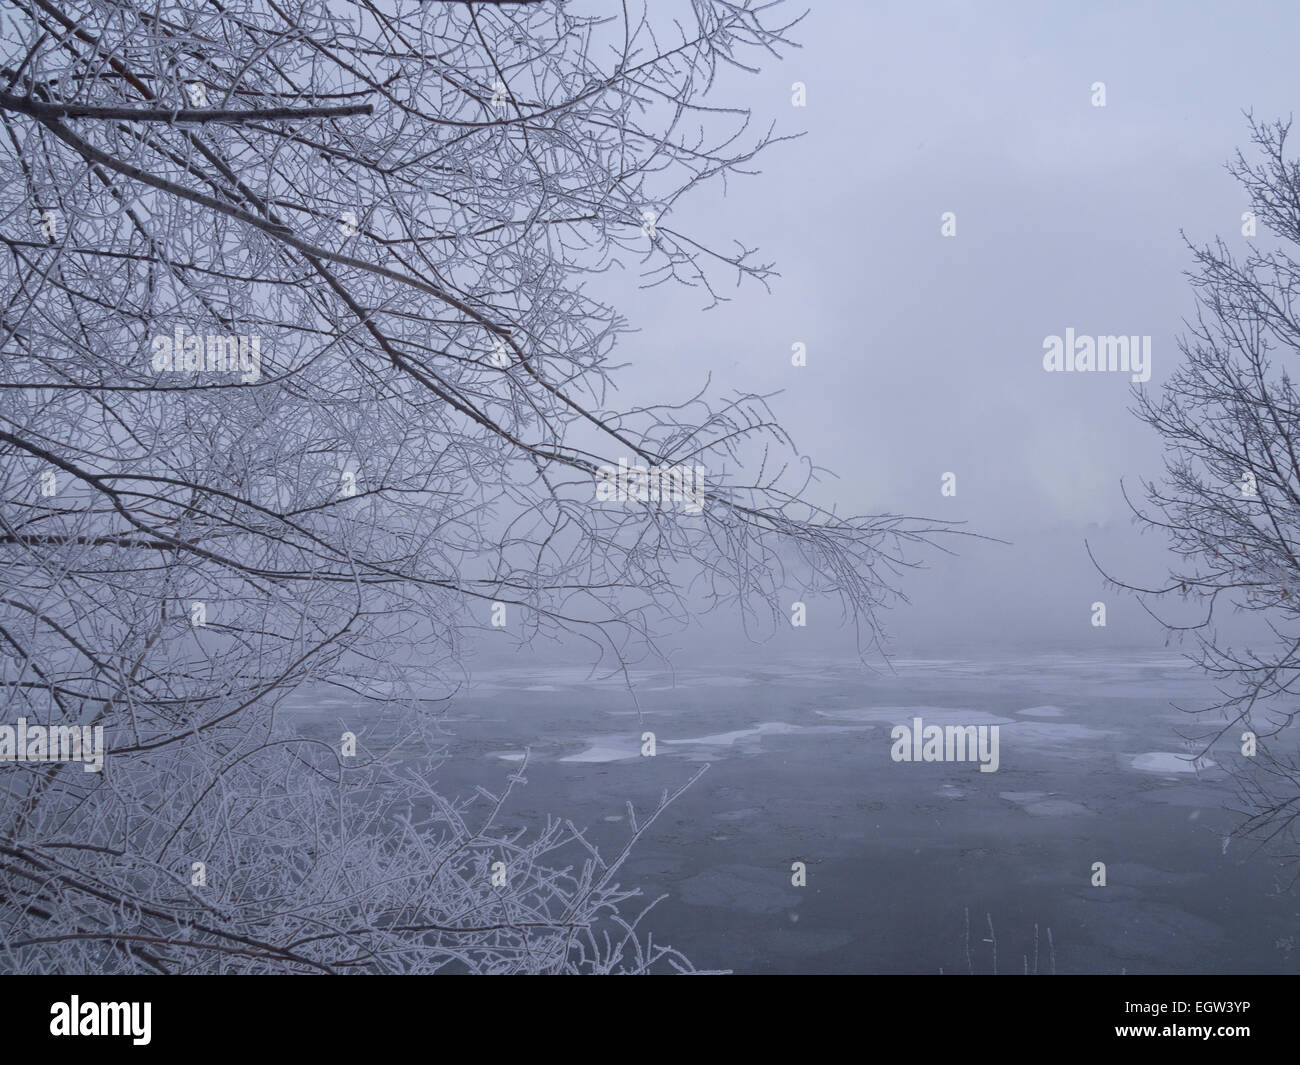 Fog on the river on an overcast day in winter Stock Photo